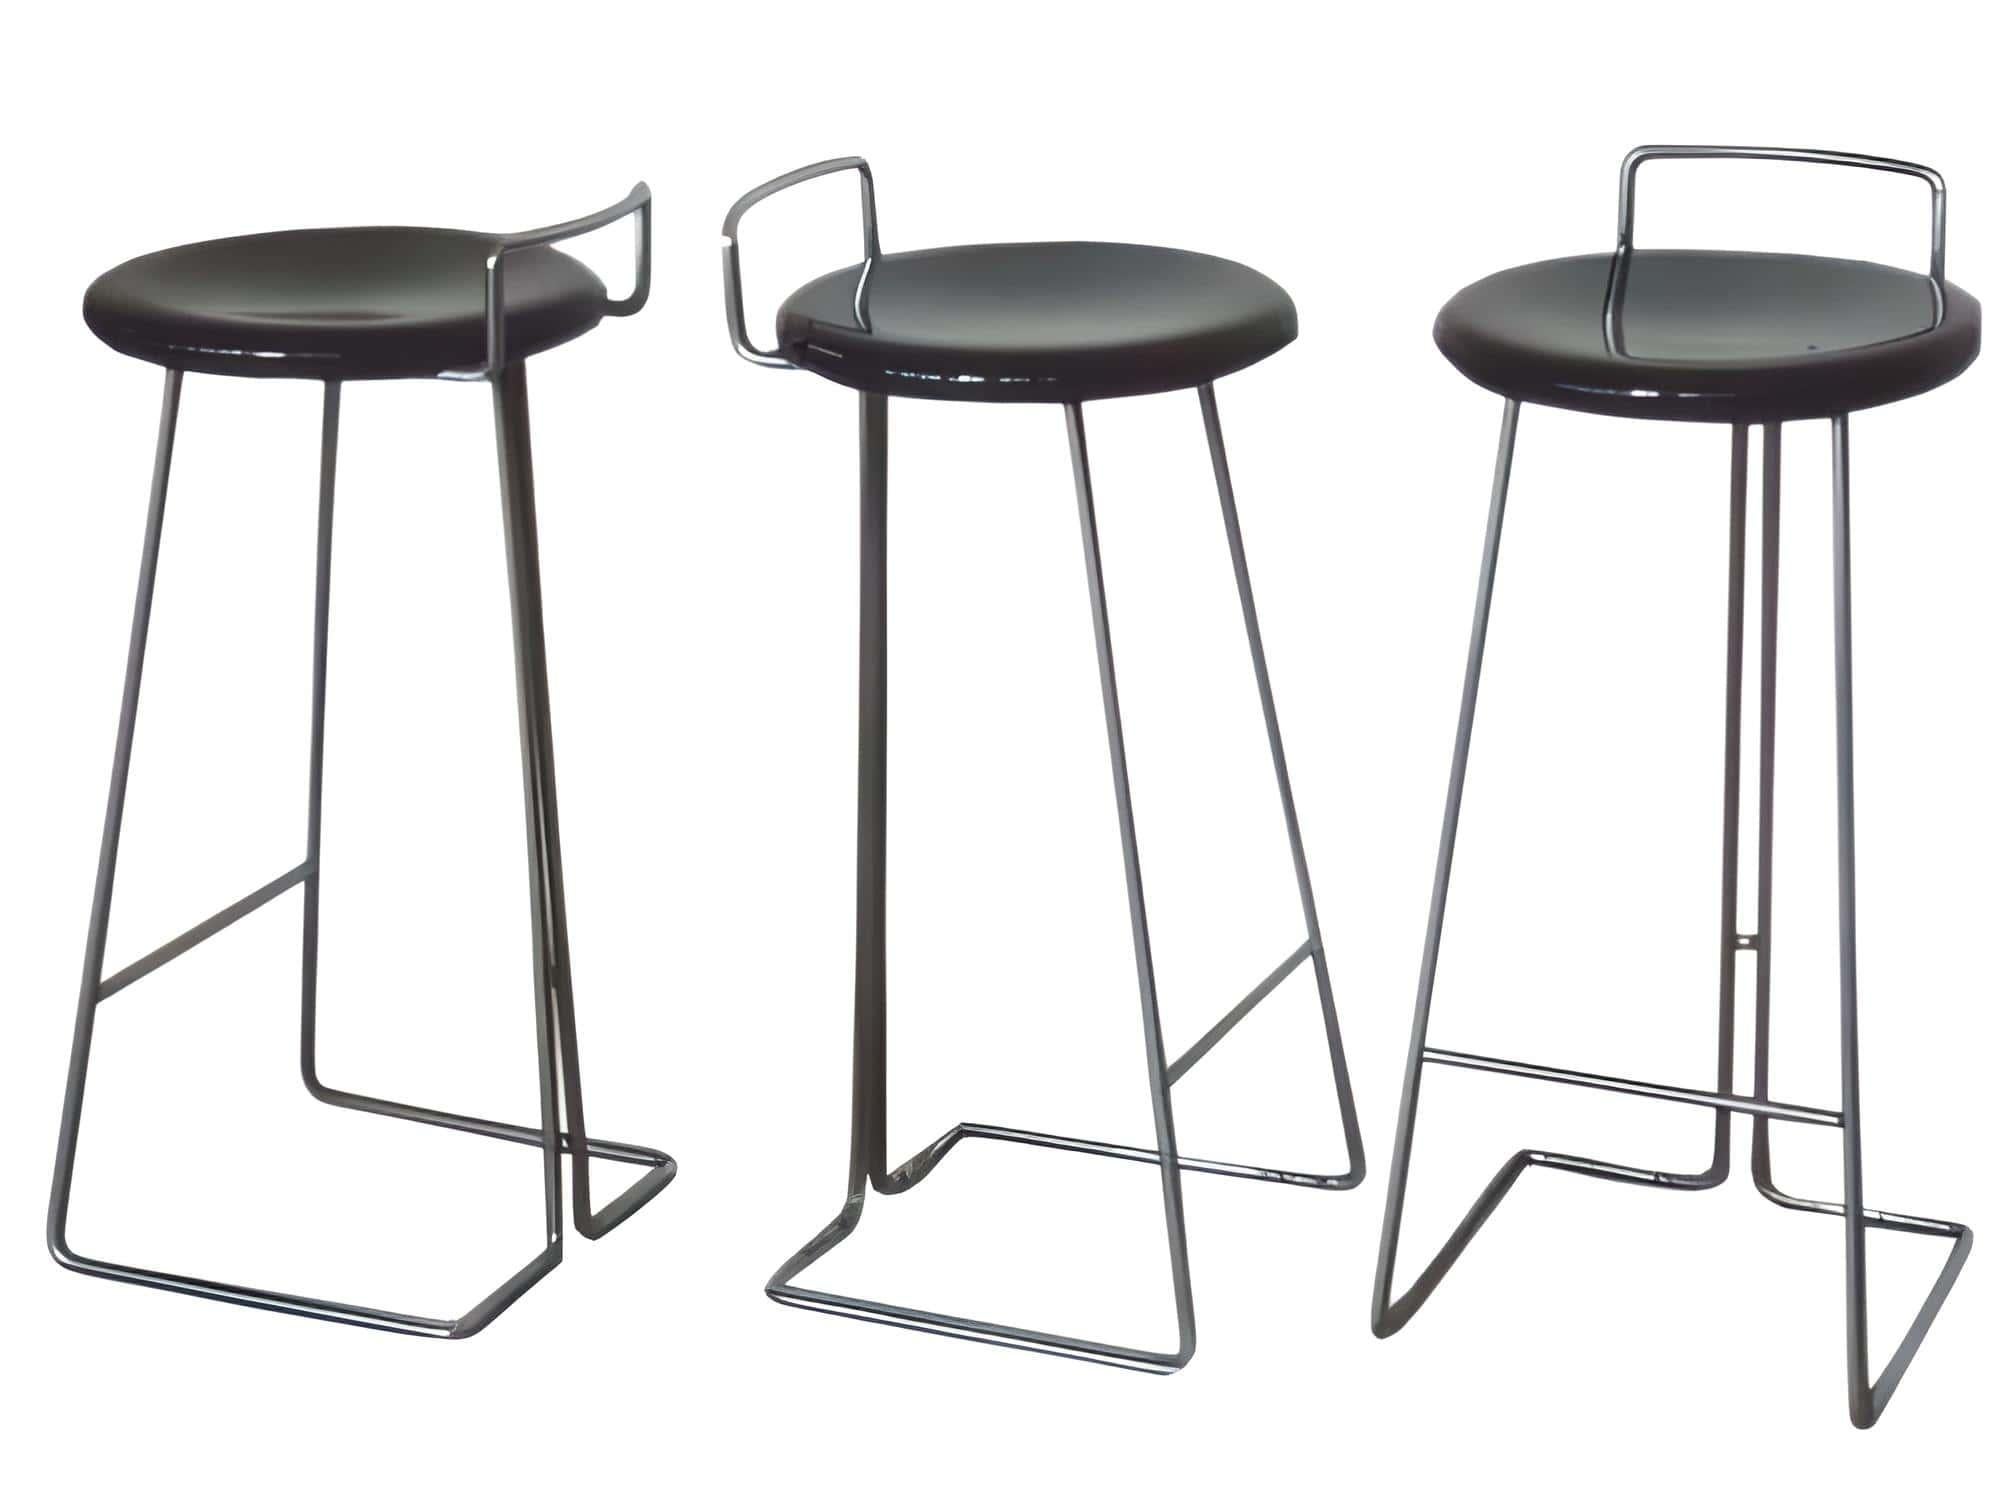 Italian Set of 3 Vintage Stools by Coslin George for Dada, Italy 1970s For Sale